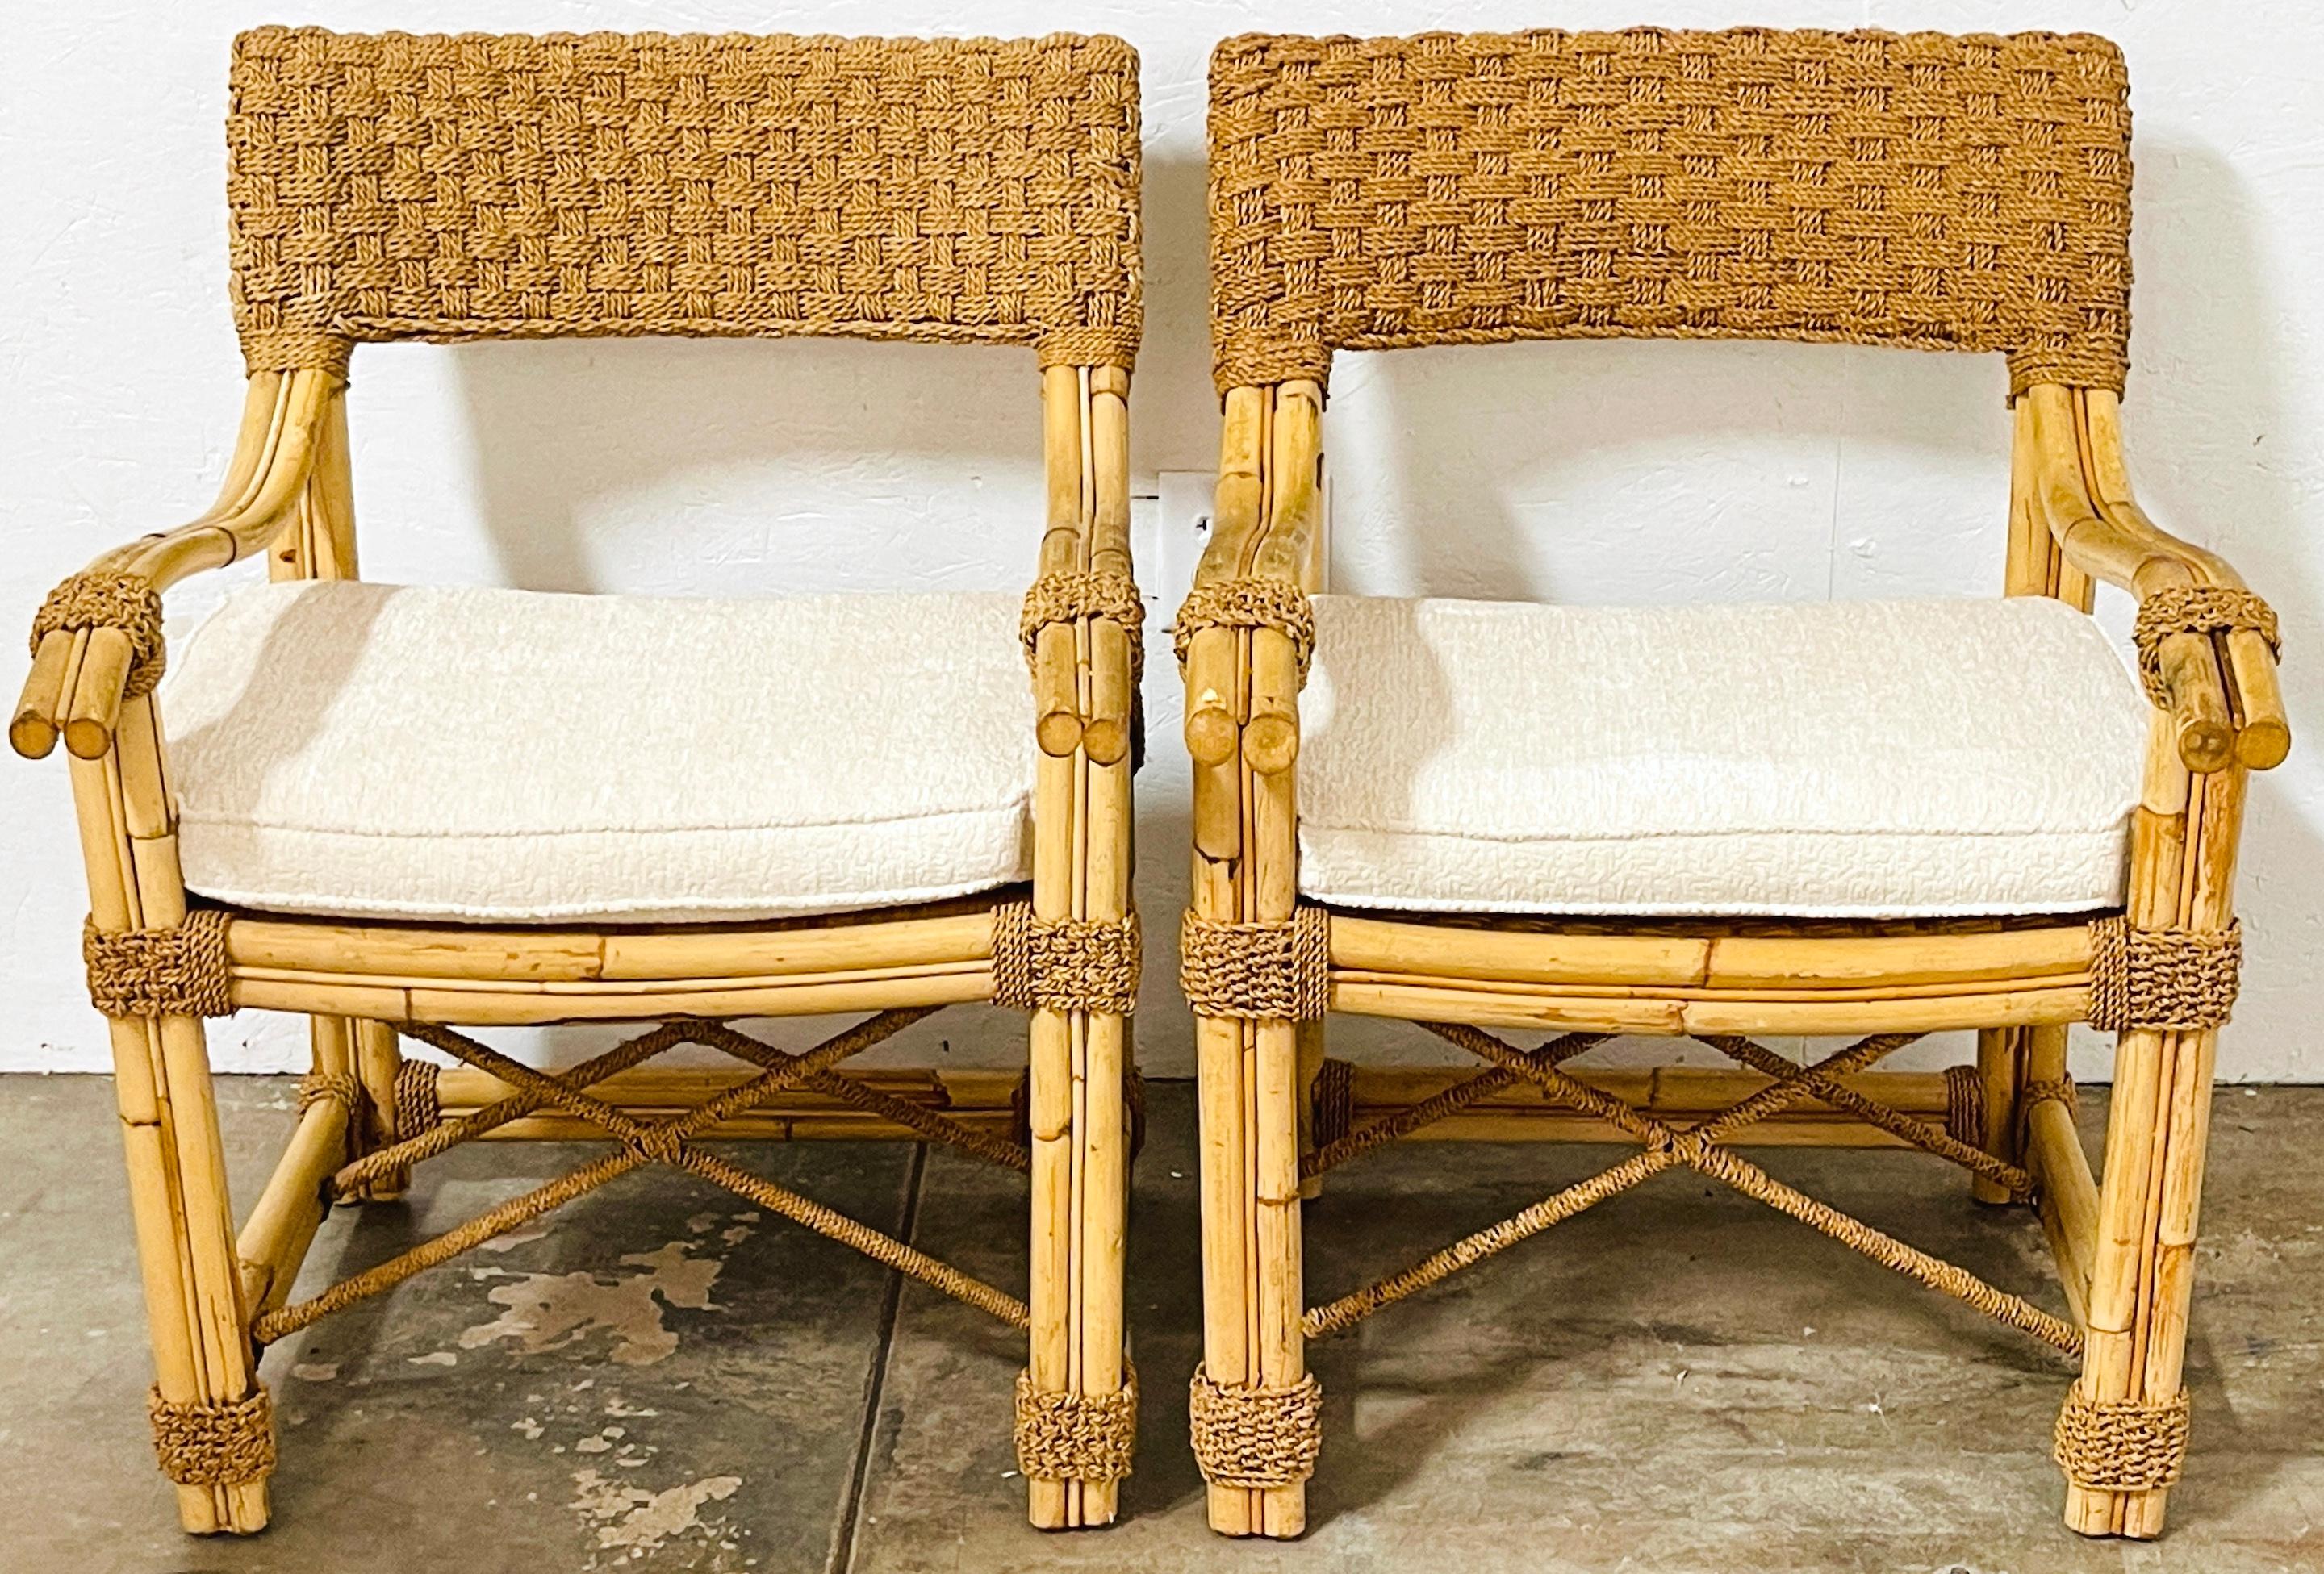 Pair of French Bamboo & Woven Seagrass Armchairs with Bouclé Seat Cushions 
France, Late 20th Century 
Offering exotic French elegance and comfort, this pair of Late 20th Century French bamboo & woven seagrass armchairs embodies sophistication and